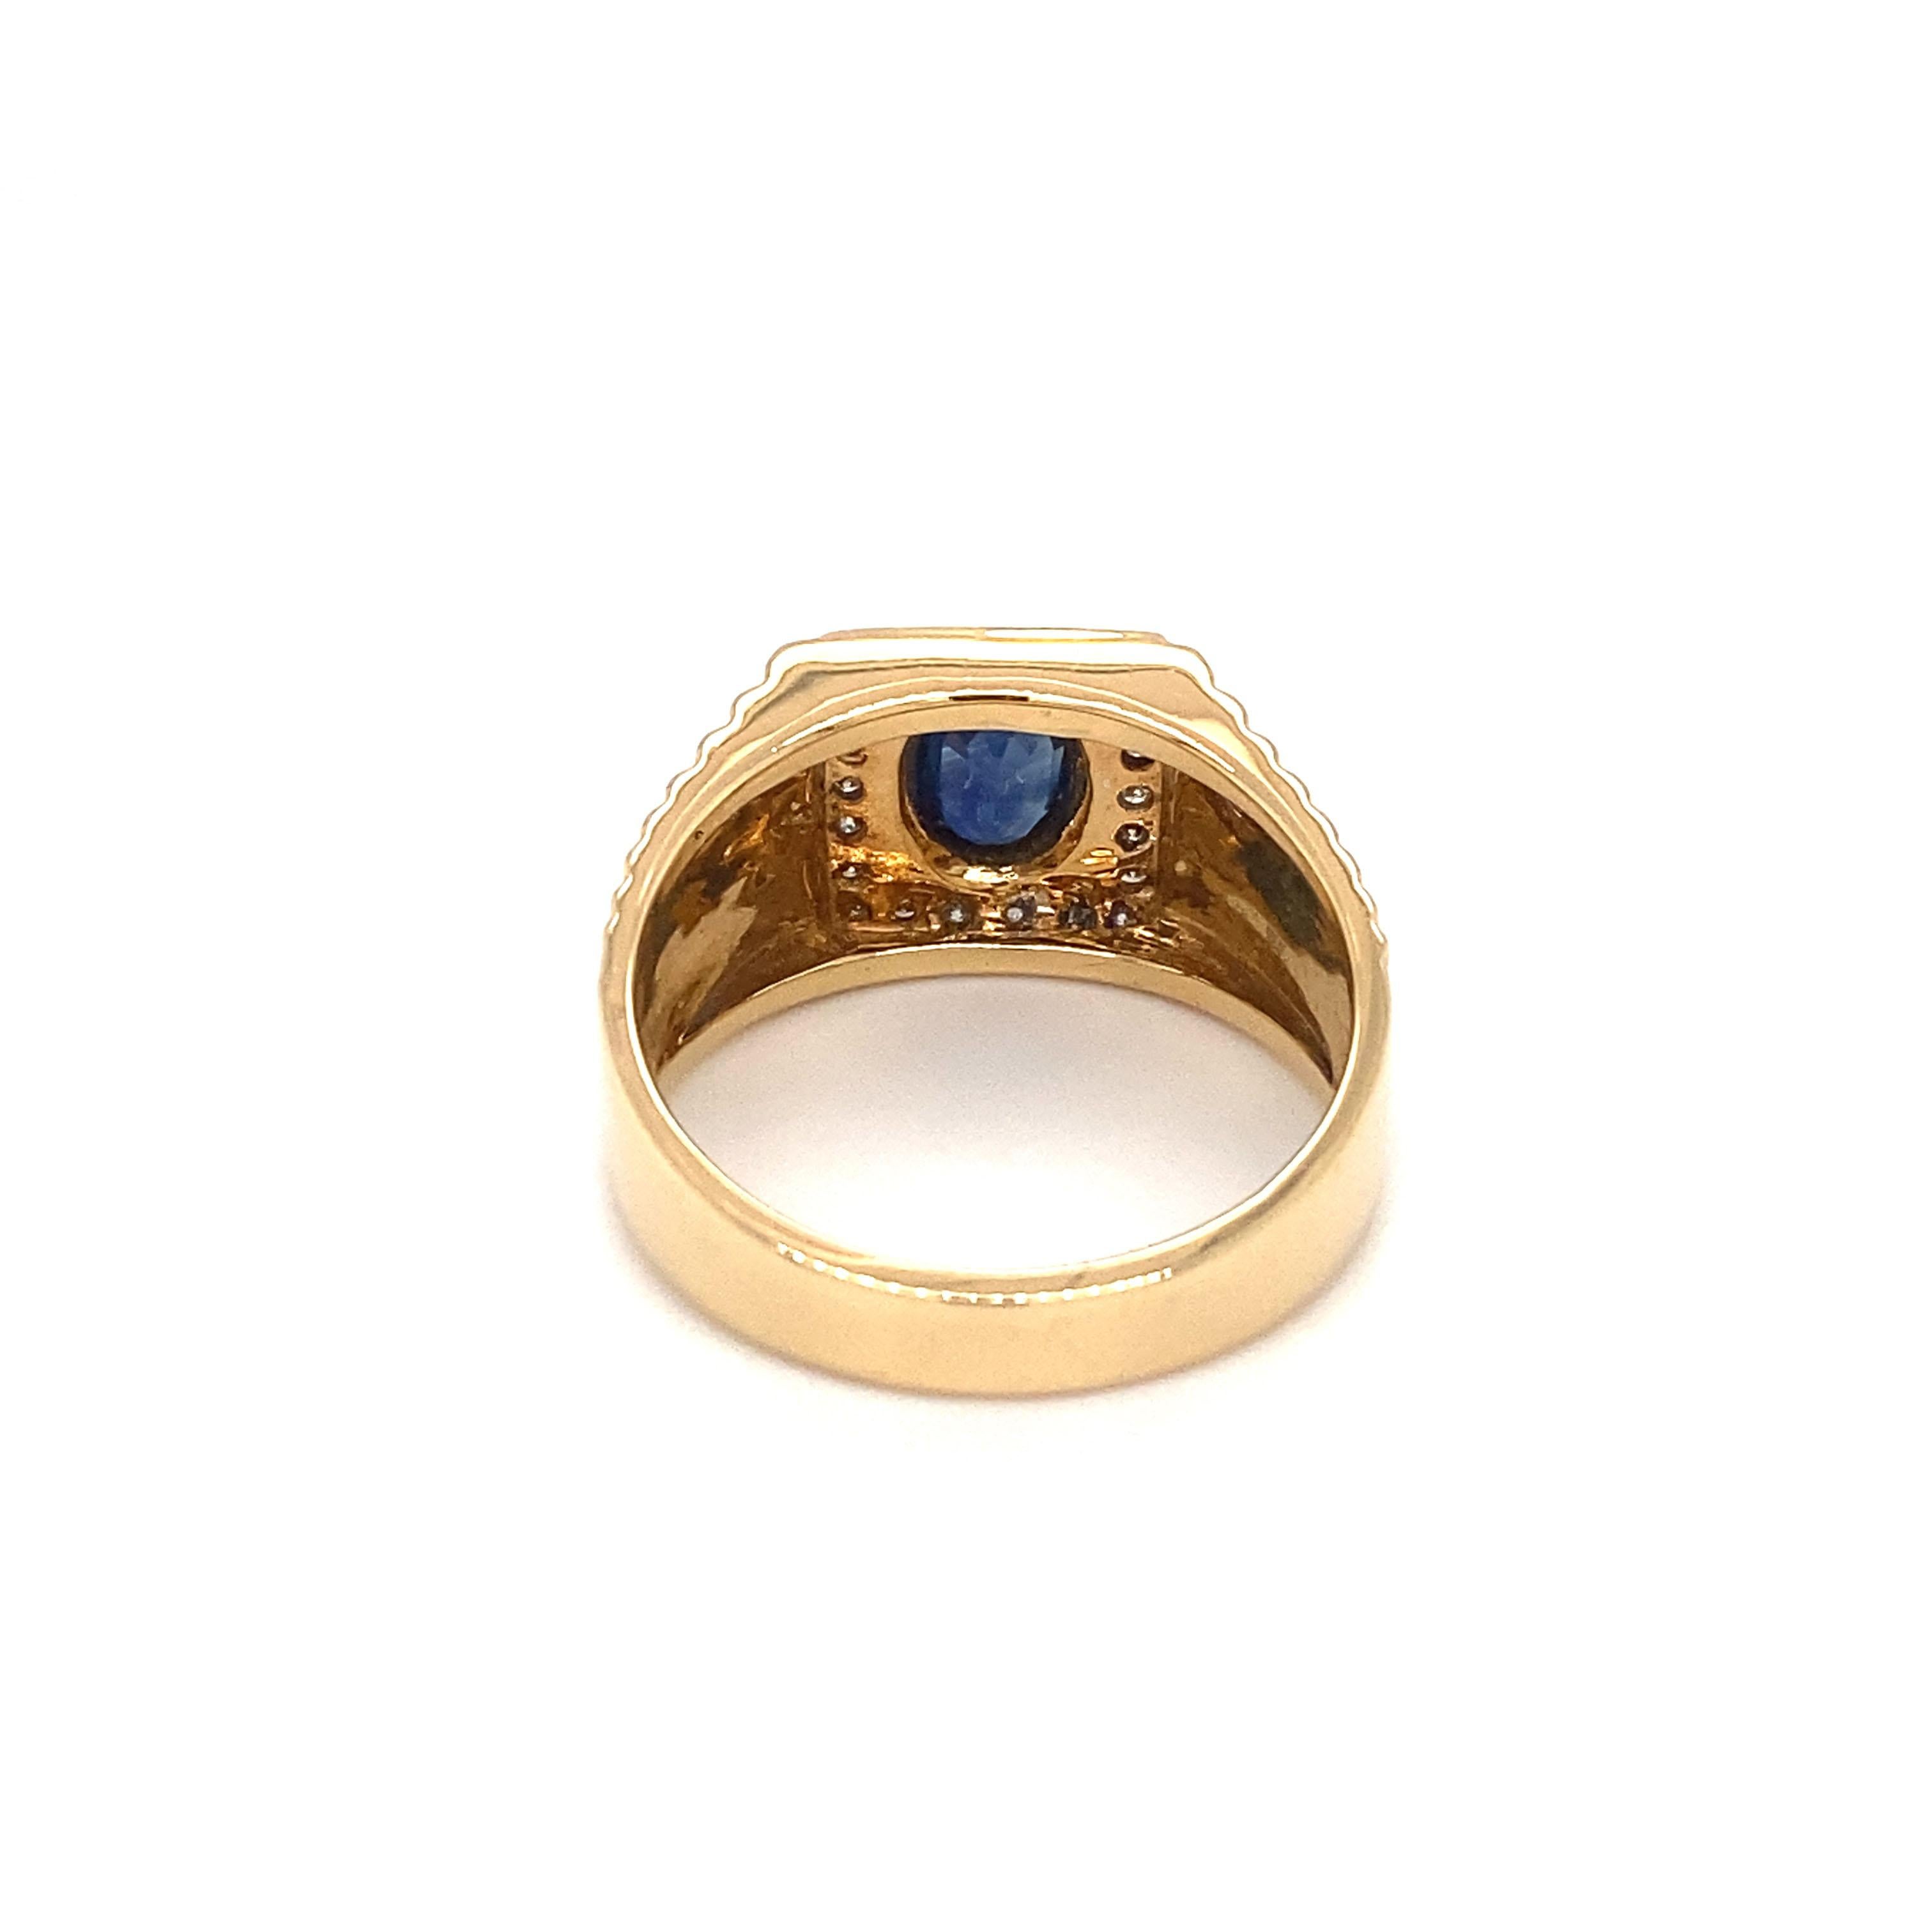 Circa 1990's Le Vian Diamond and Sapphire Ring.
An elegant  piece that makes the perfect accessory for any occasion. The detailing on this ring is truly one of a kind.  The pyramid like texture on the sides brings this ring to life. The royal blue